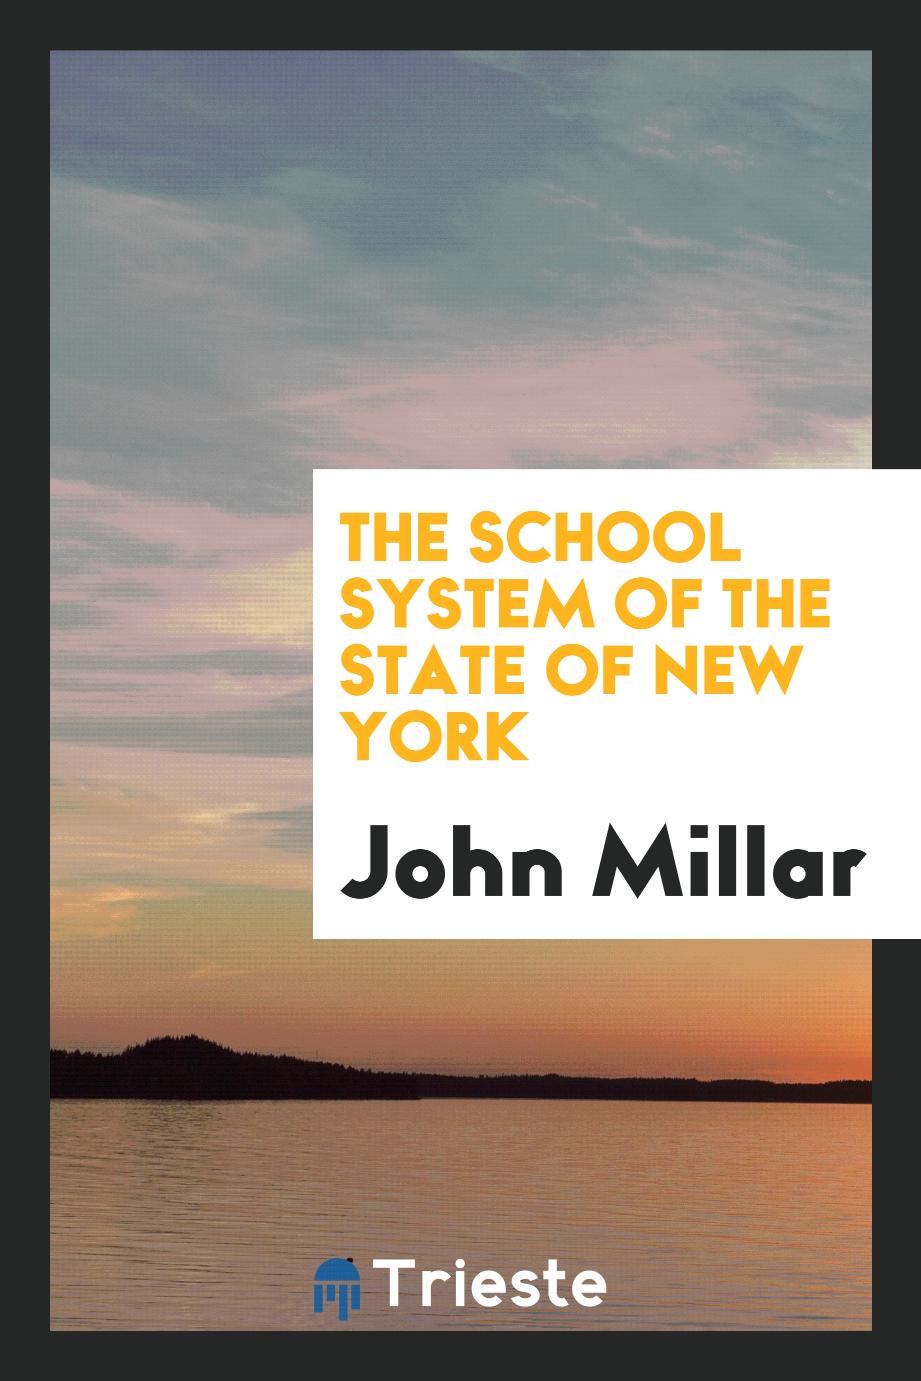 The school system of the State of New York